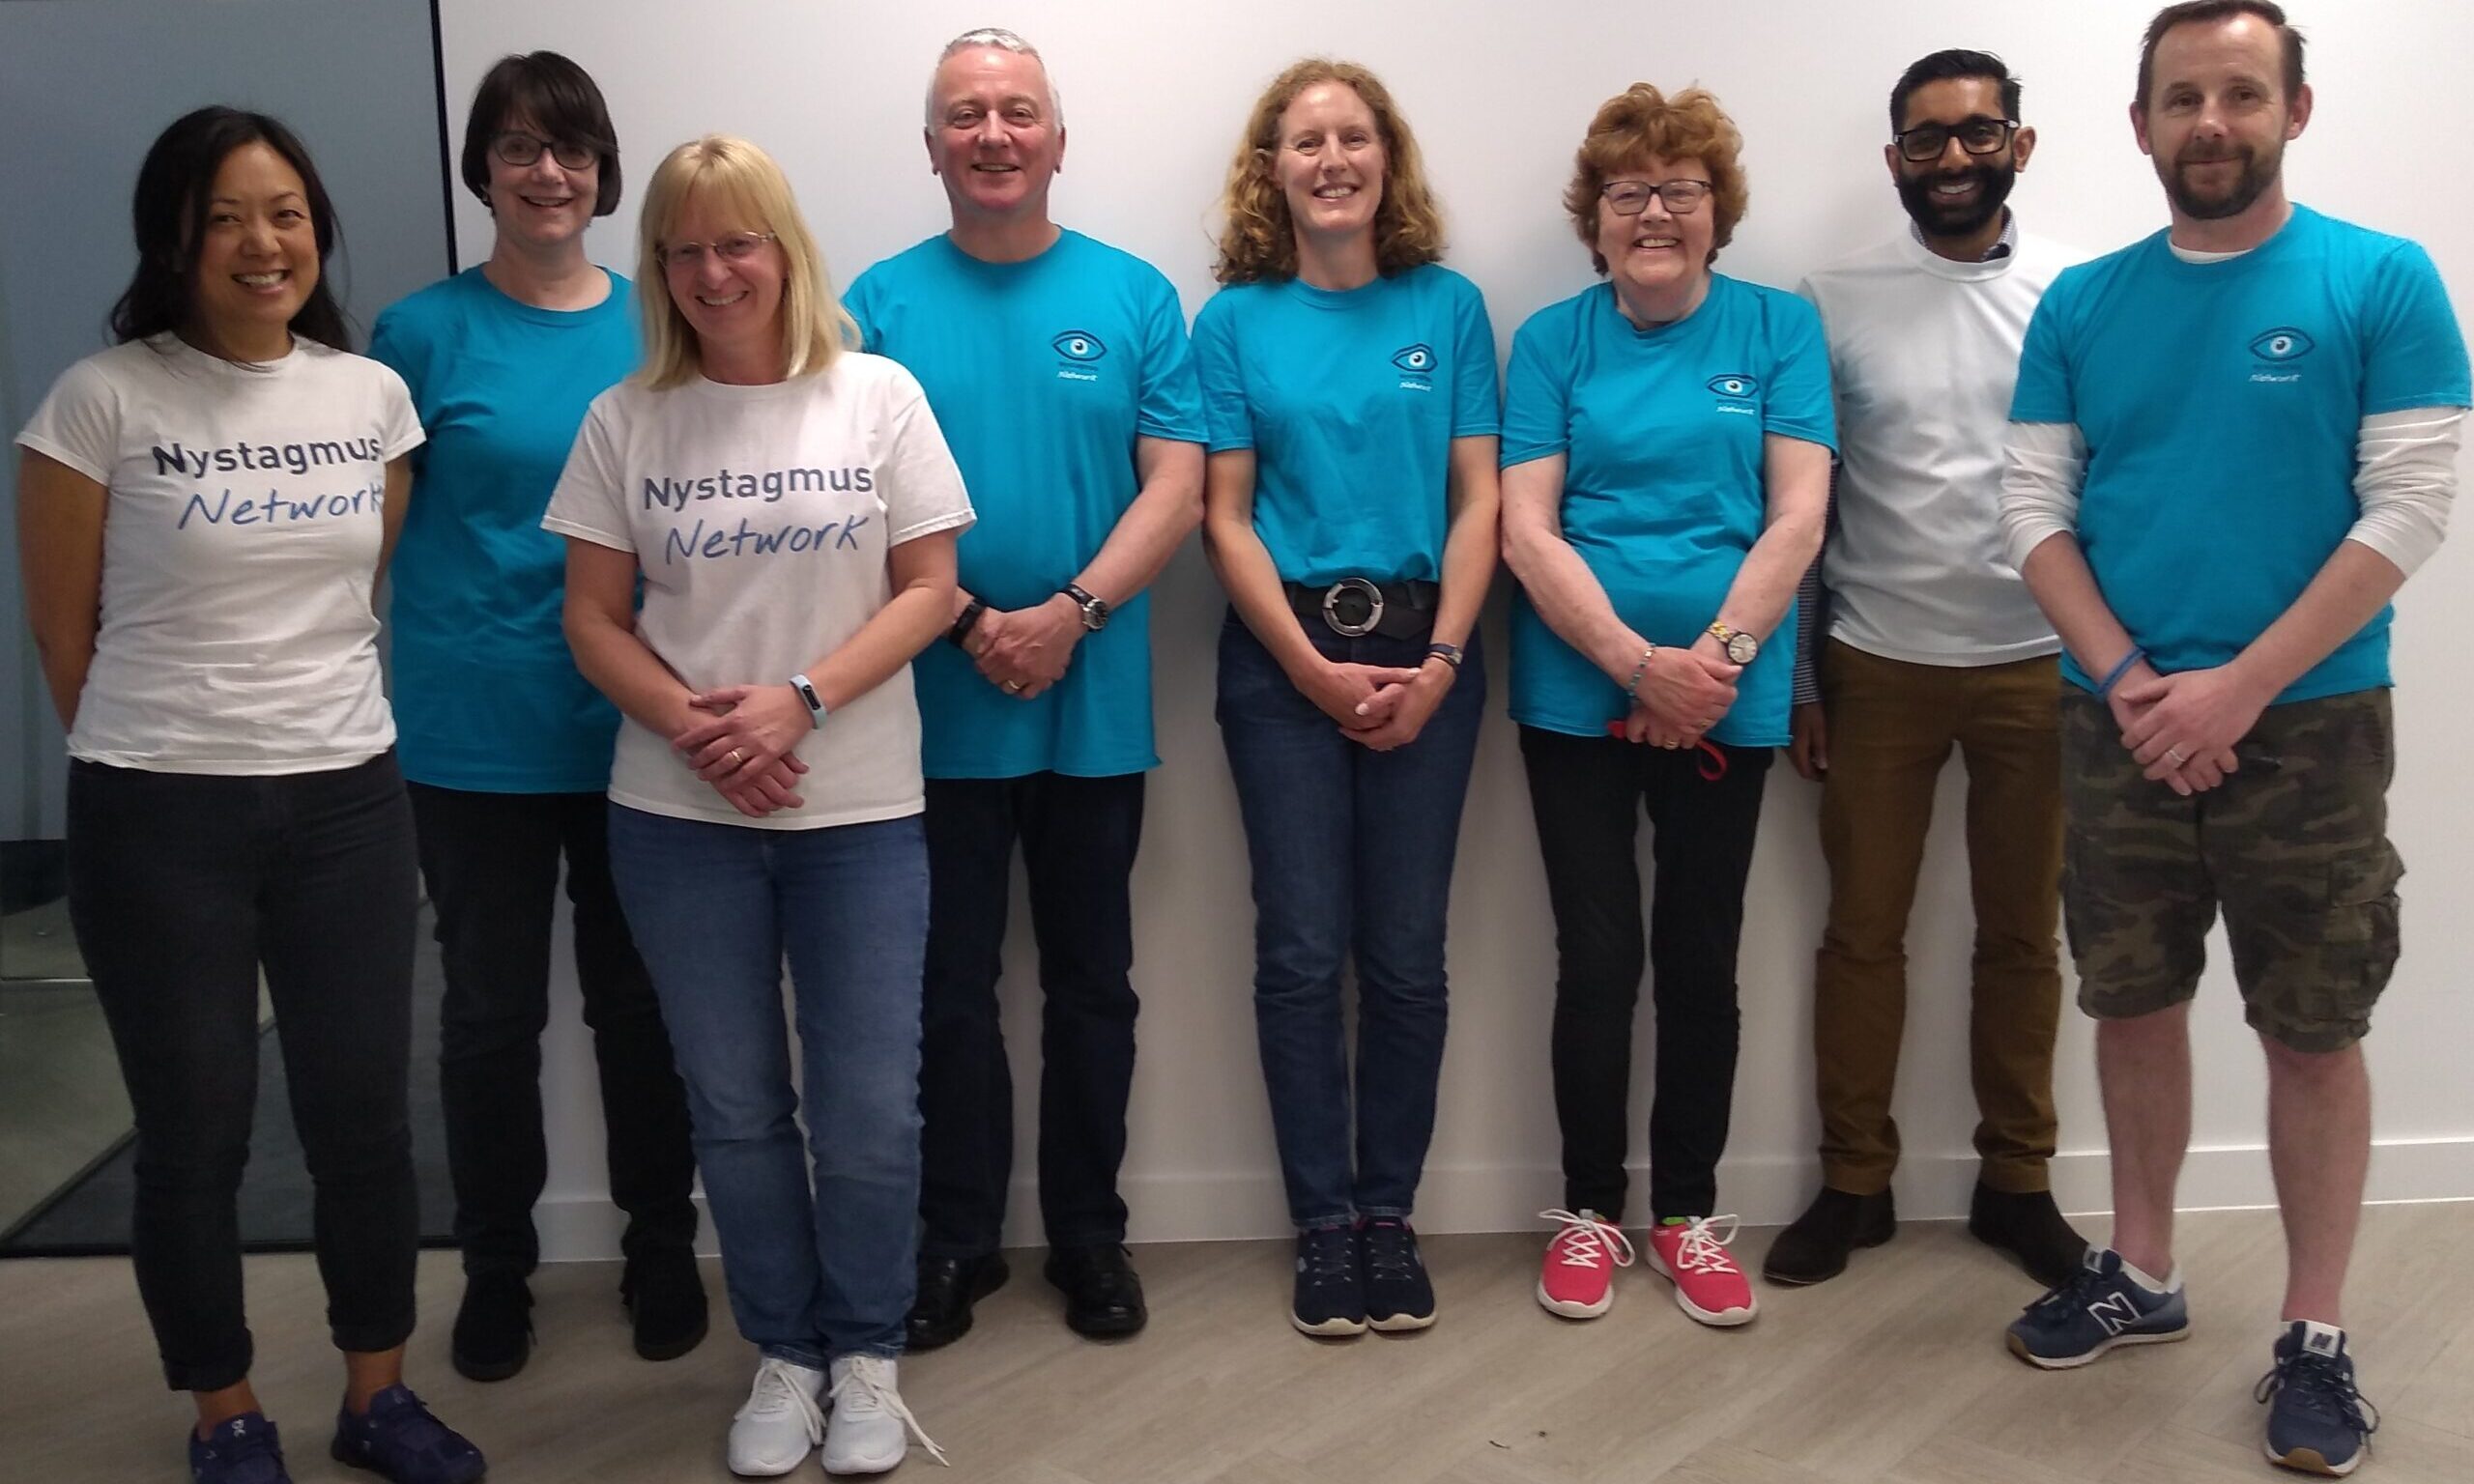 Nystagmus Network trustees smile for the camera, wearing their charity T-shirts.